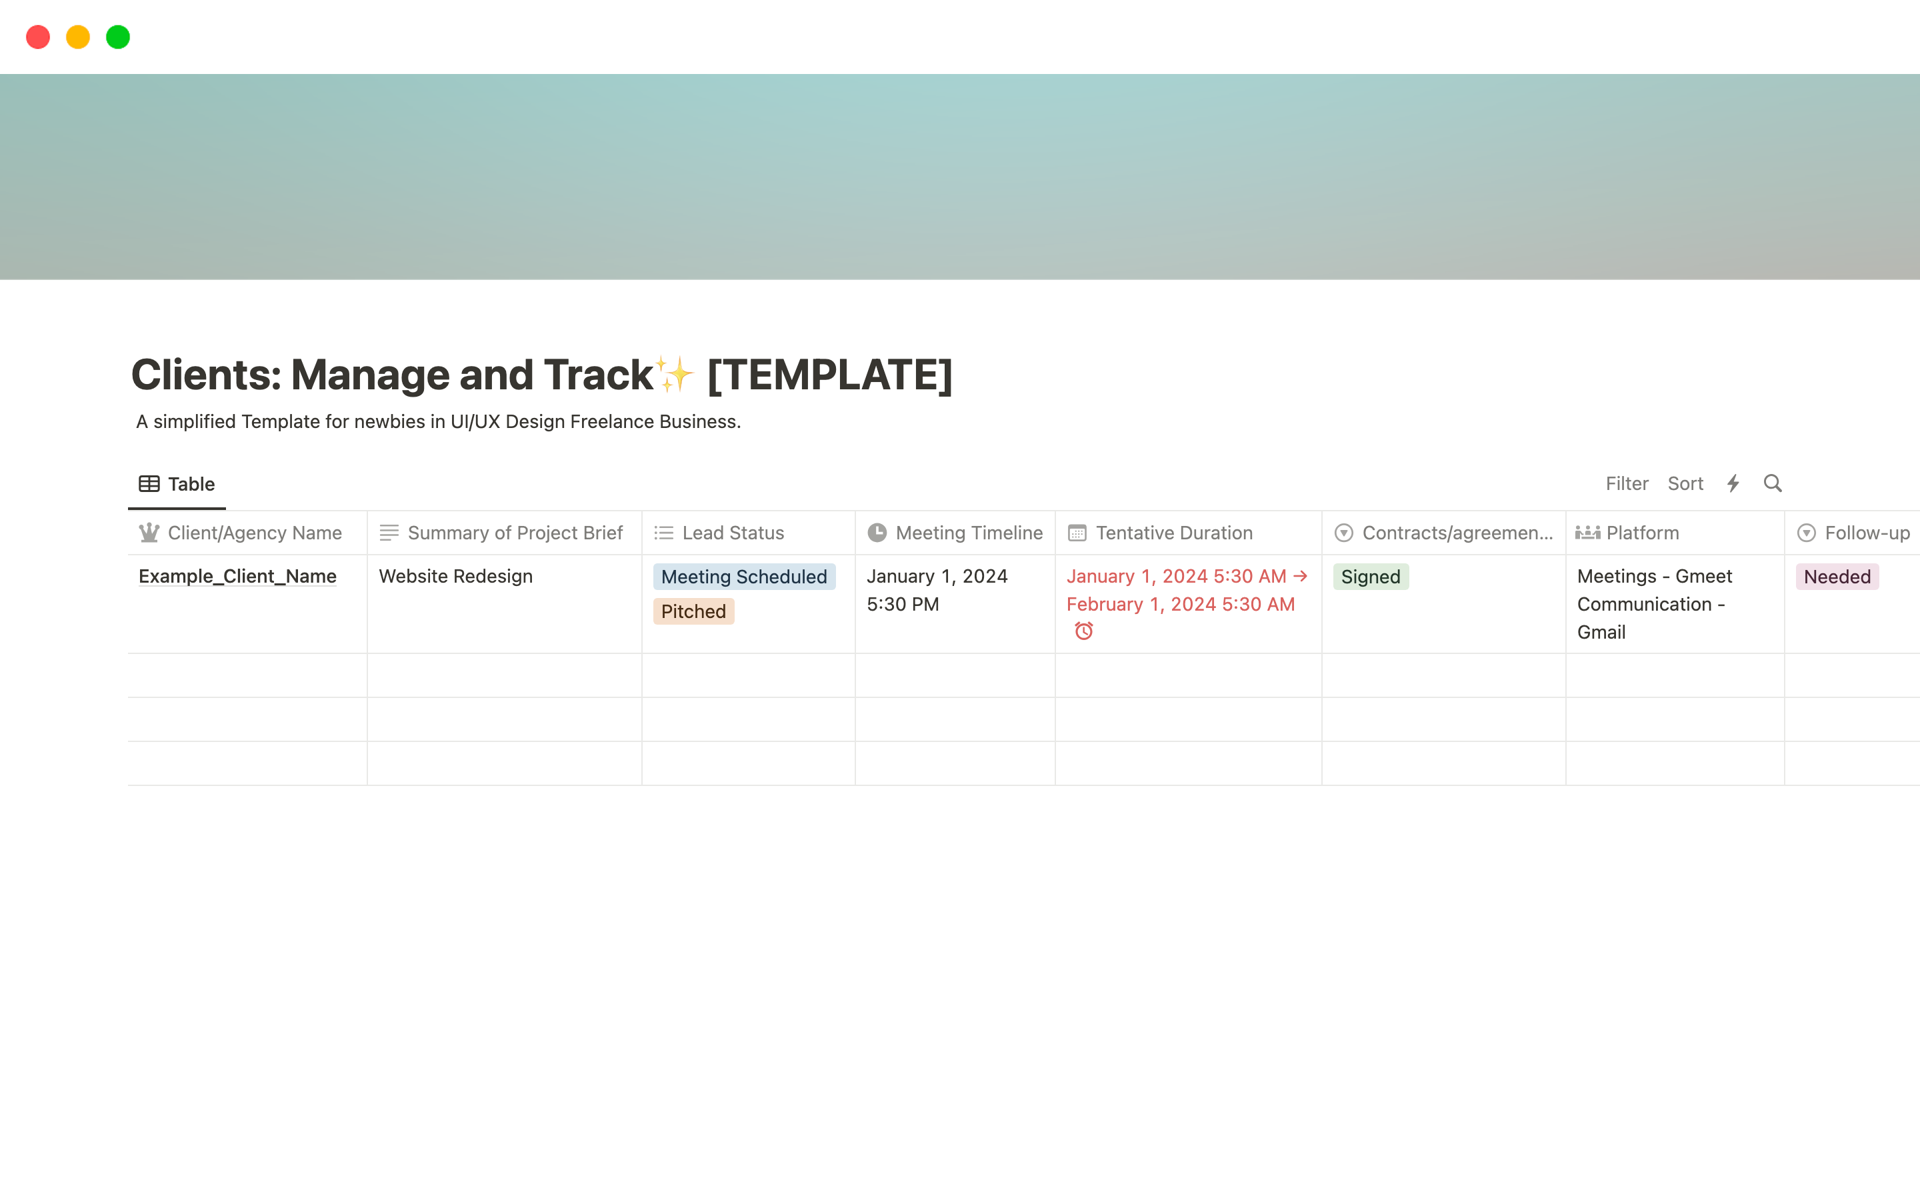 A simplified Template for newbies in Freelance Business, to track client leads progress.